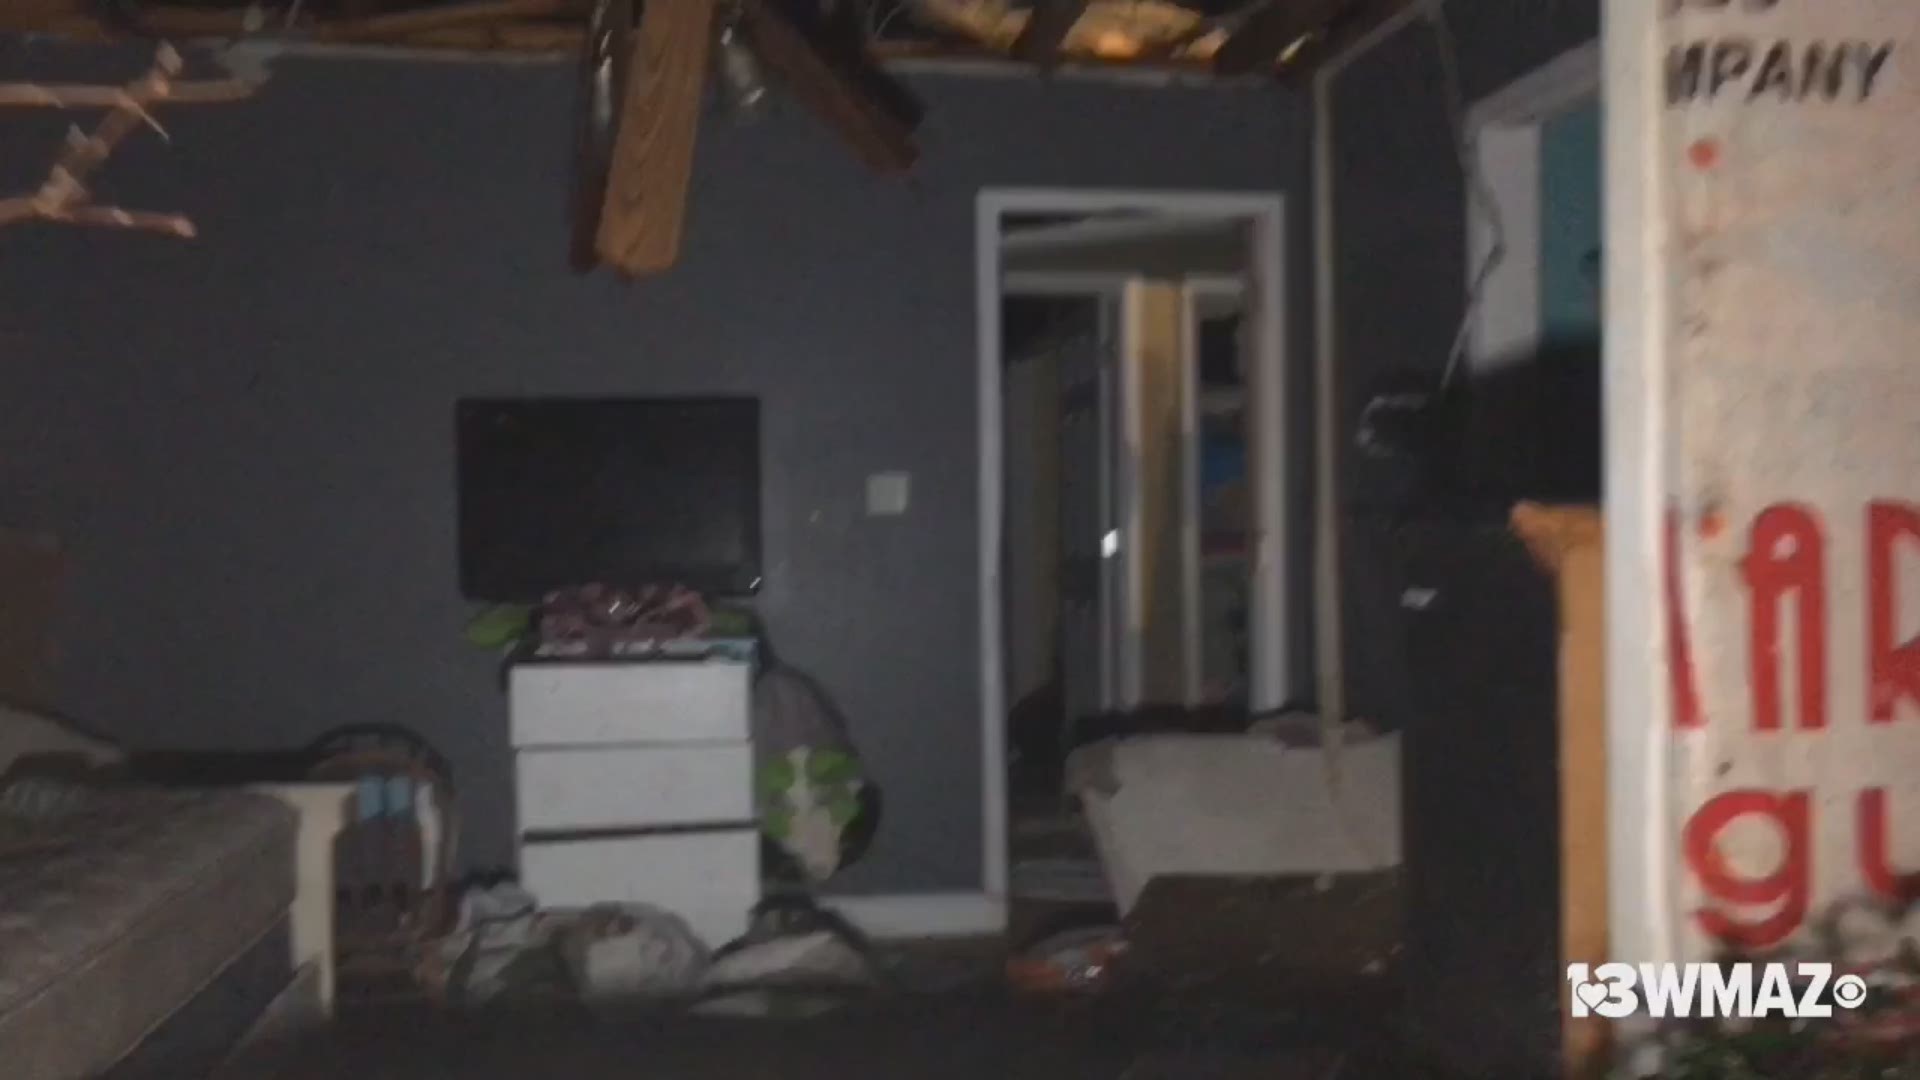 The Barber's home on Wesley Chapel Road was completely destroyed by the storms that moved through Central Georgia Sunday afternoon.